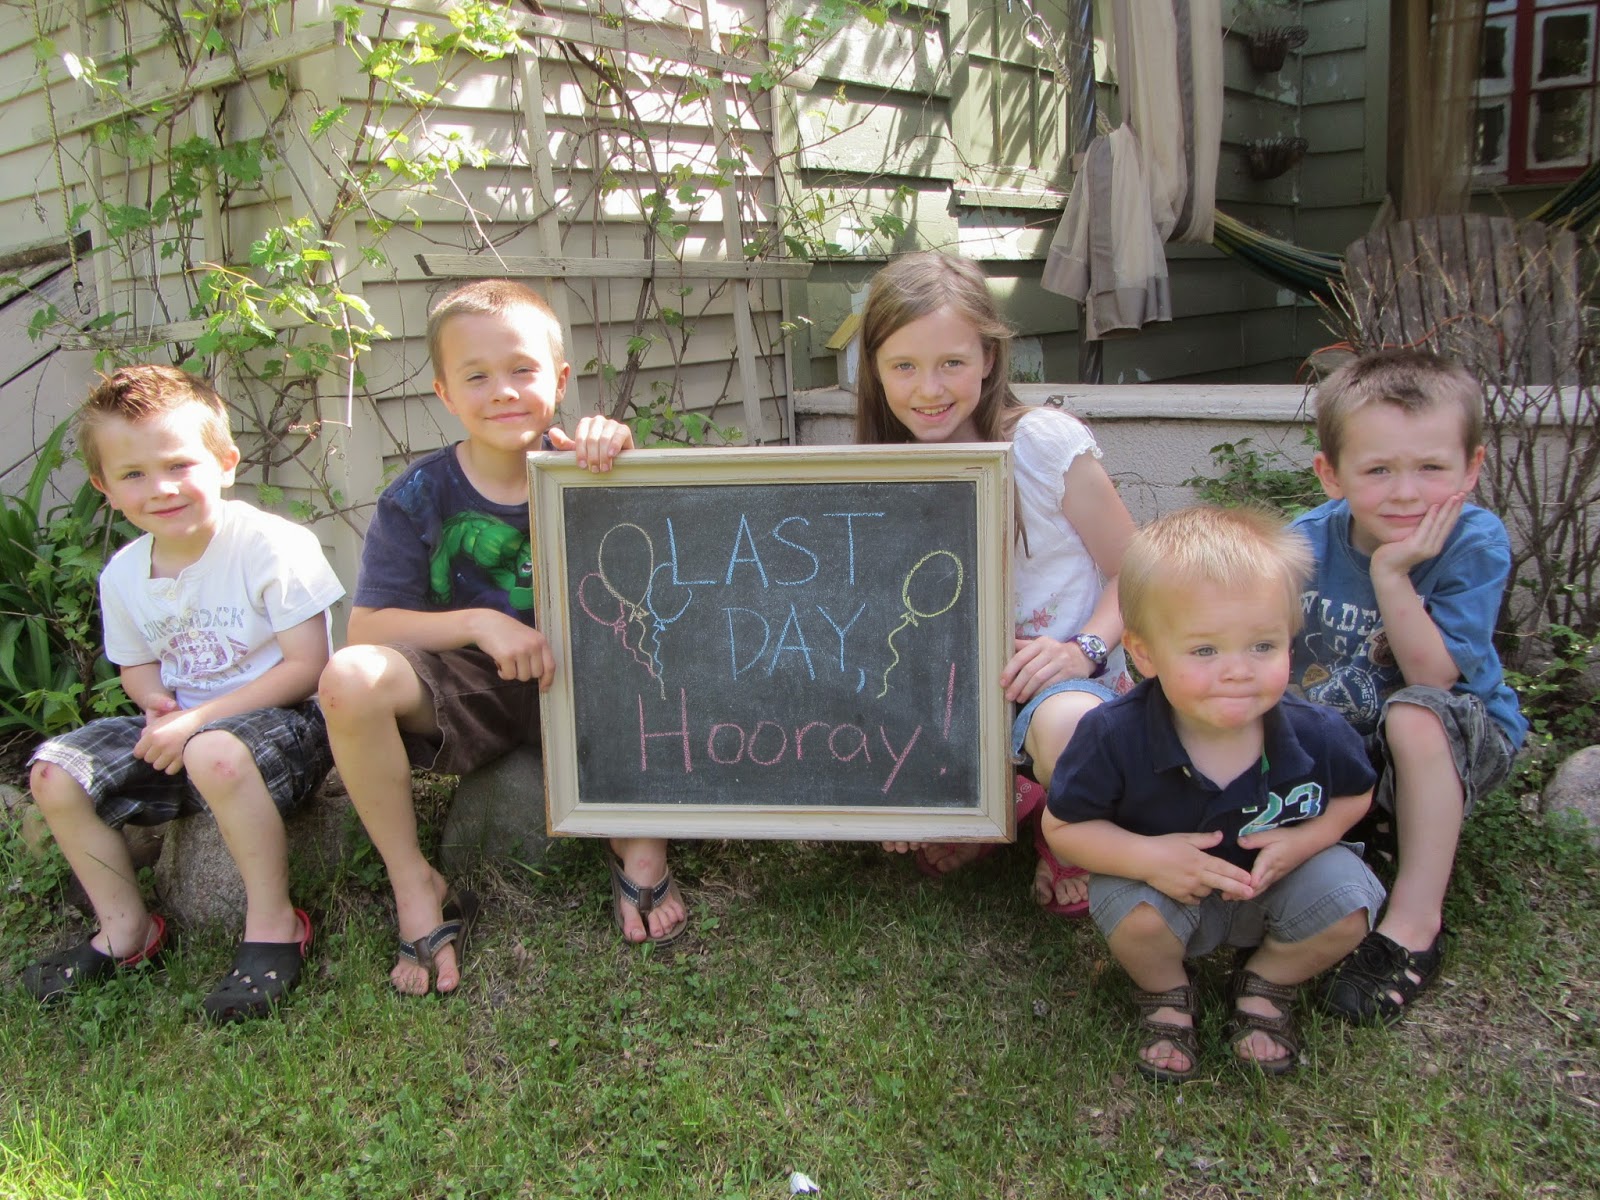 Last Day, Hooray! 2014 {How one family celebrated the last day of homeschool} The Unlikely Homeschool